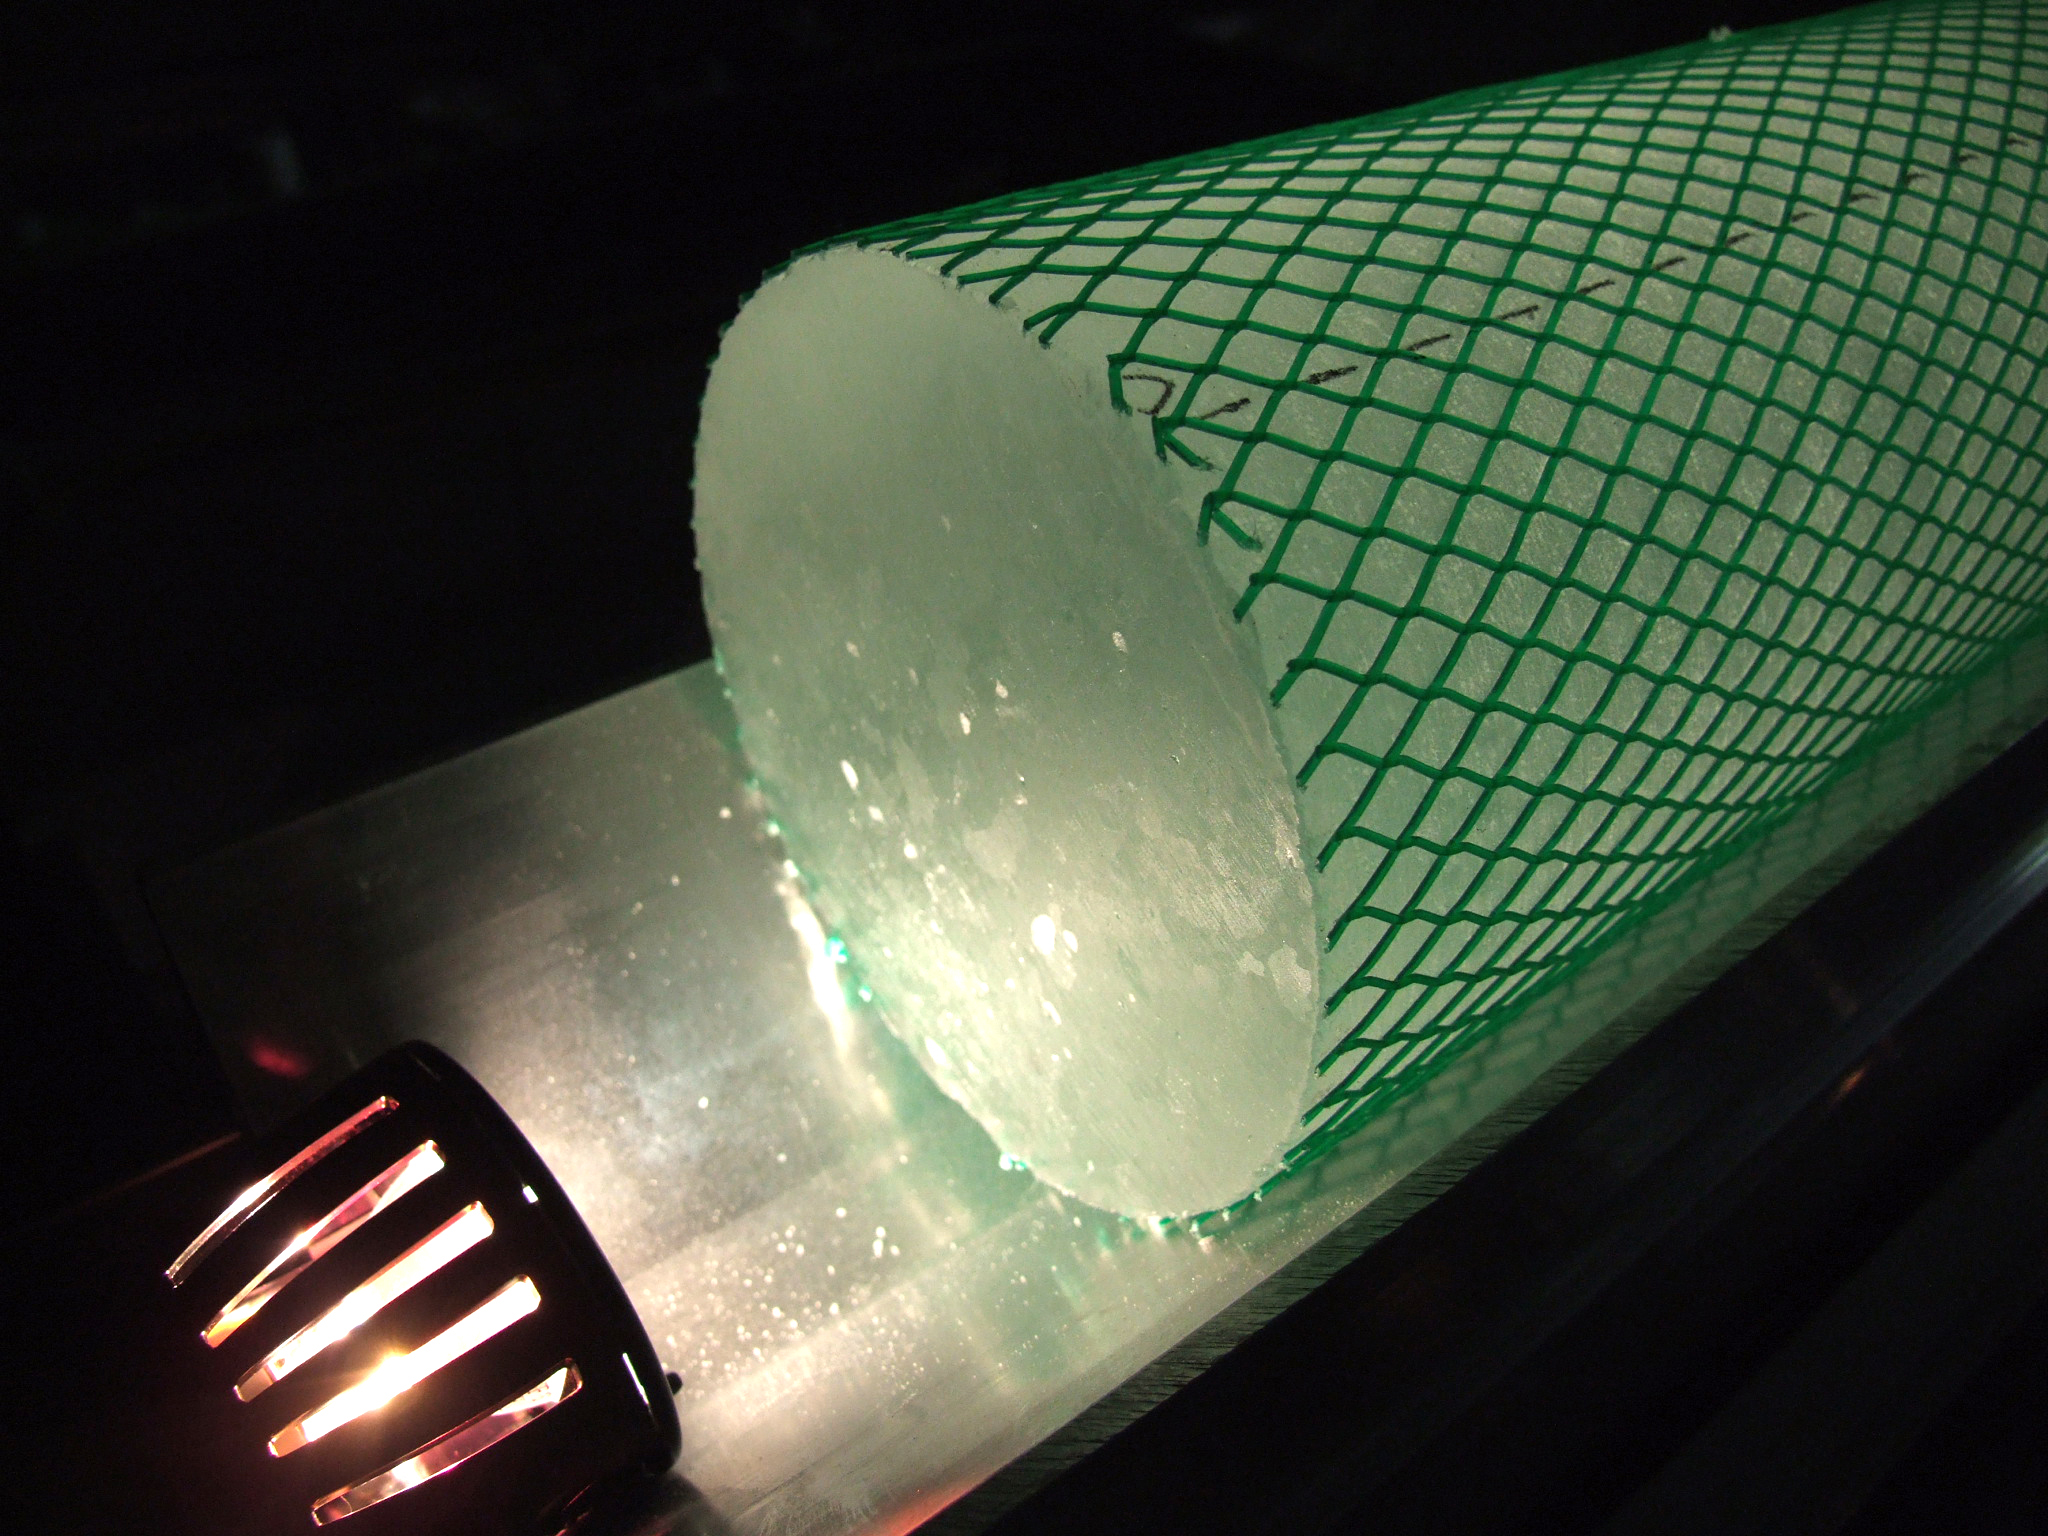 Green net covers an ice core.